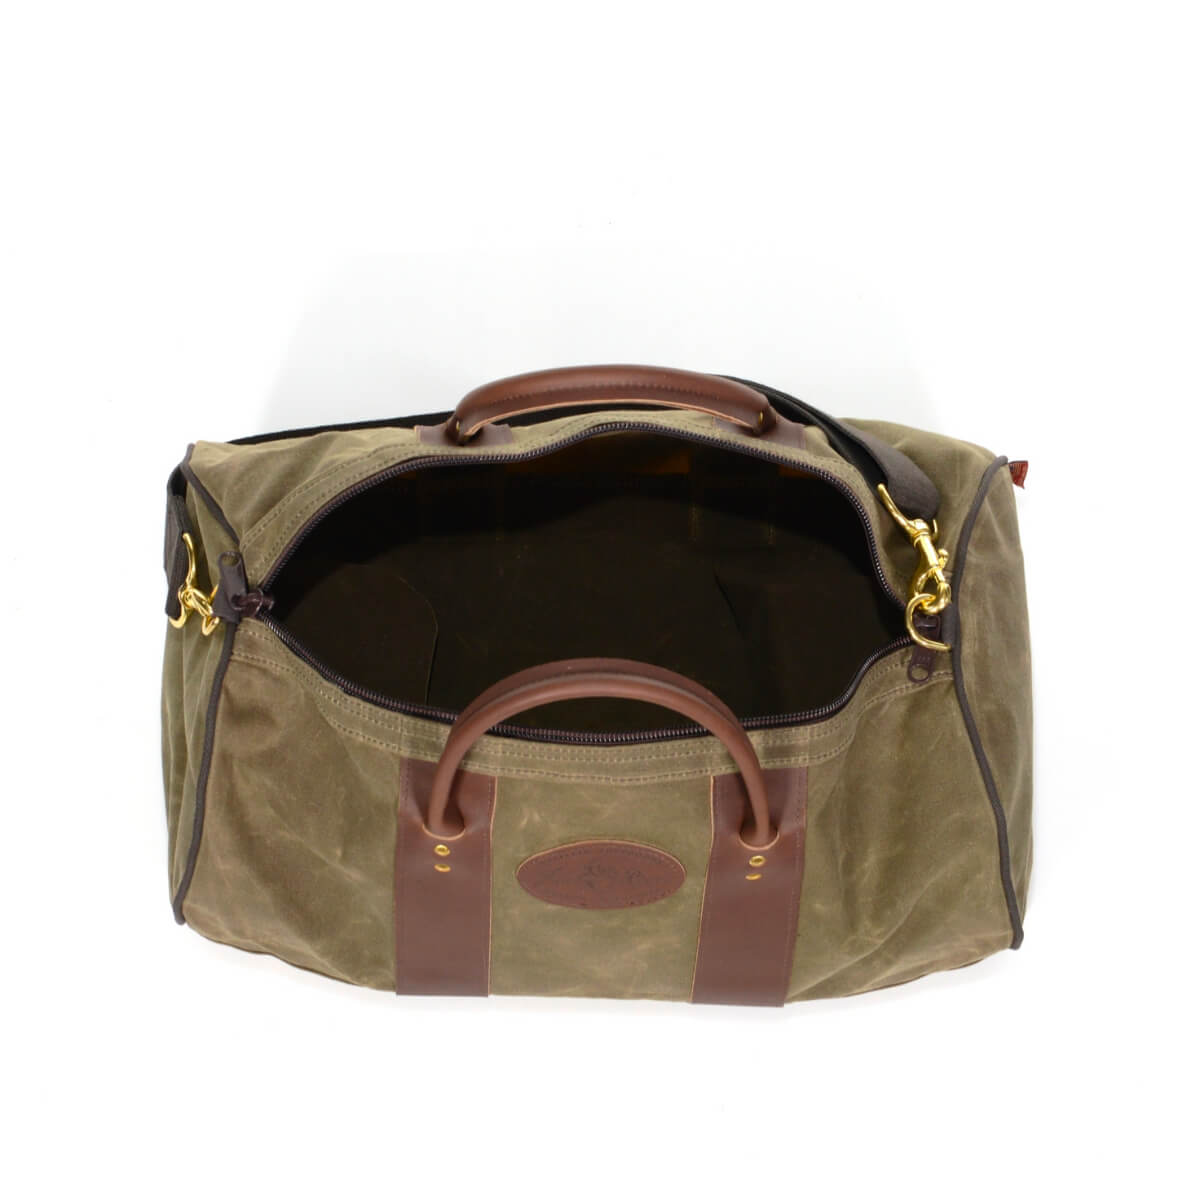 Frost River ImOut Duffel Bag